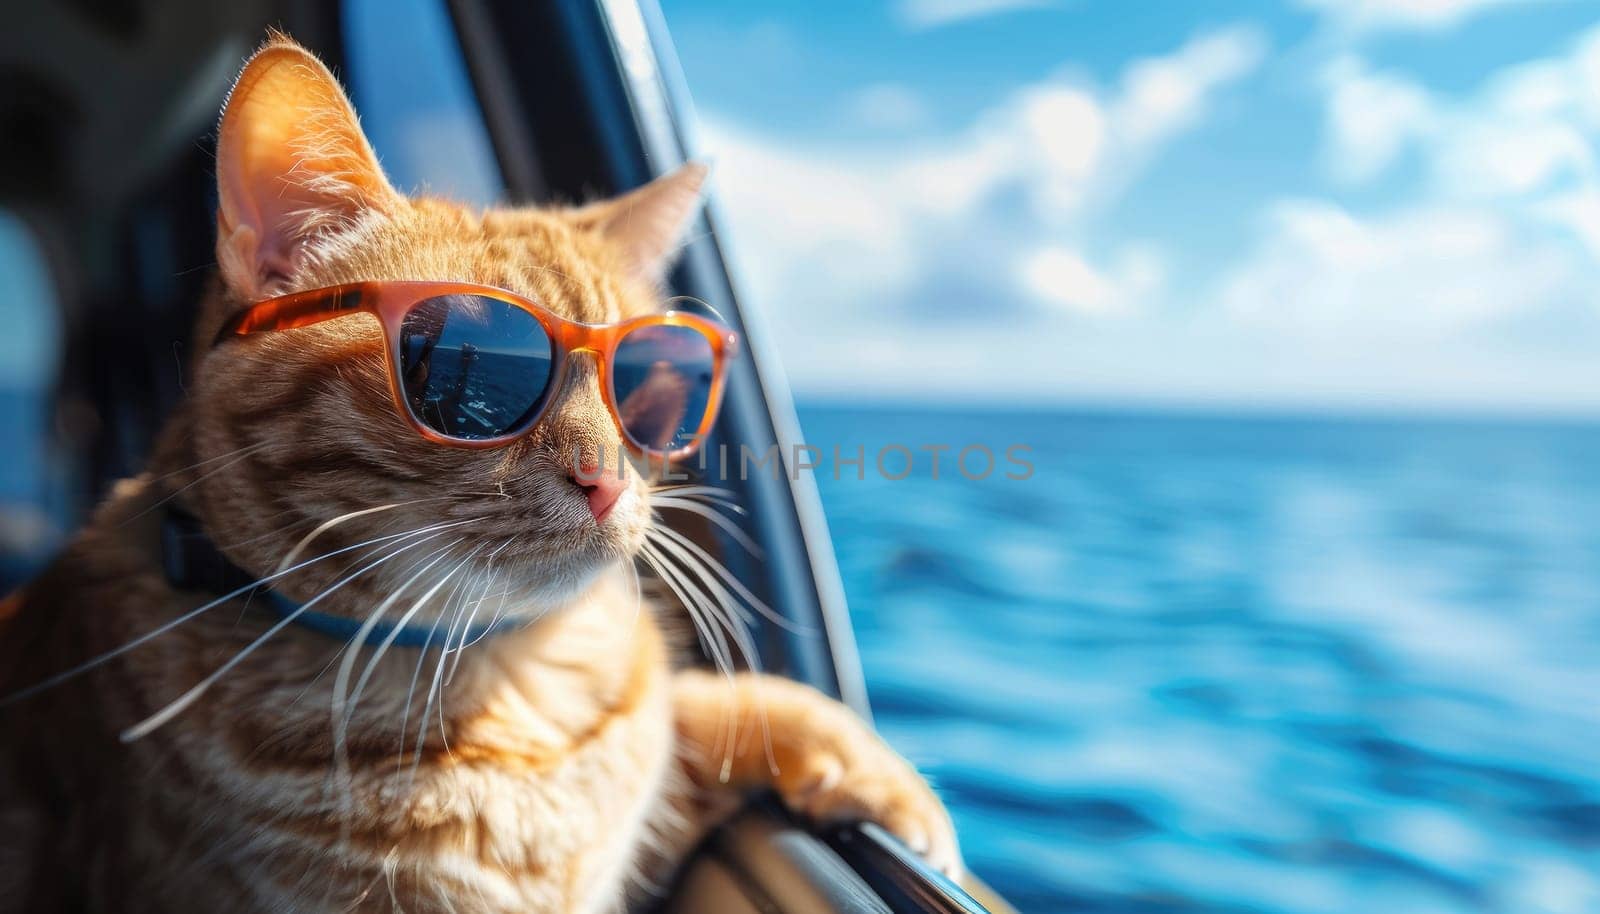 A cat wearing sunglasses is sitting in a car window by AI generated image.